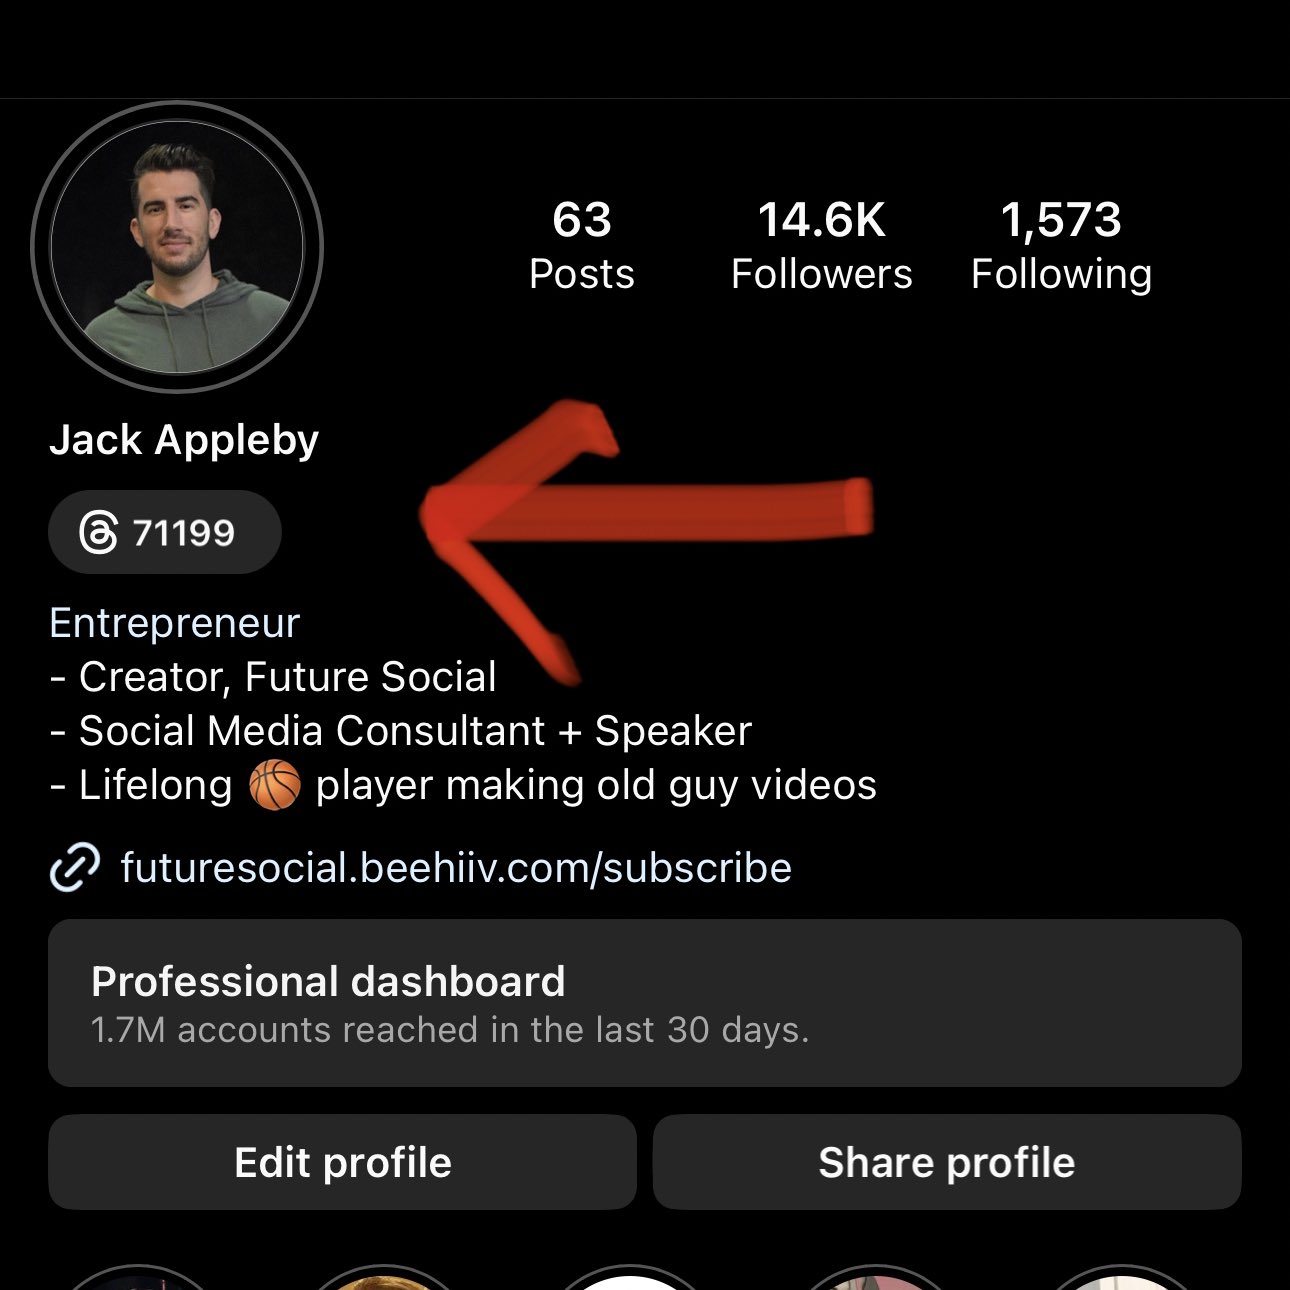 Jack Appleby on Twitter: "When you join THREADS from your Instagram, you get a Threads badge on your IG profile. Smart way to integrate both apps + audiences. https://t.co/noQDteq0ps" / Twitter